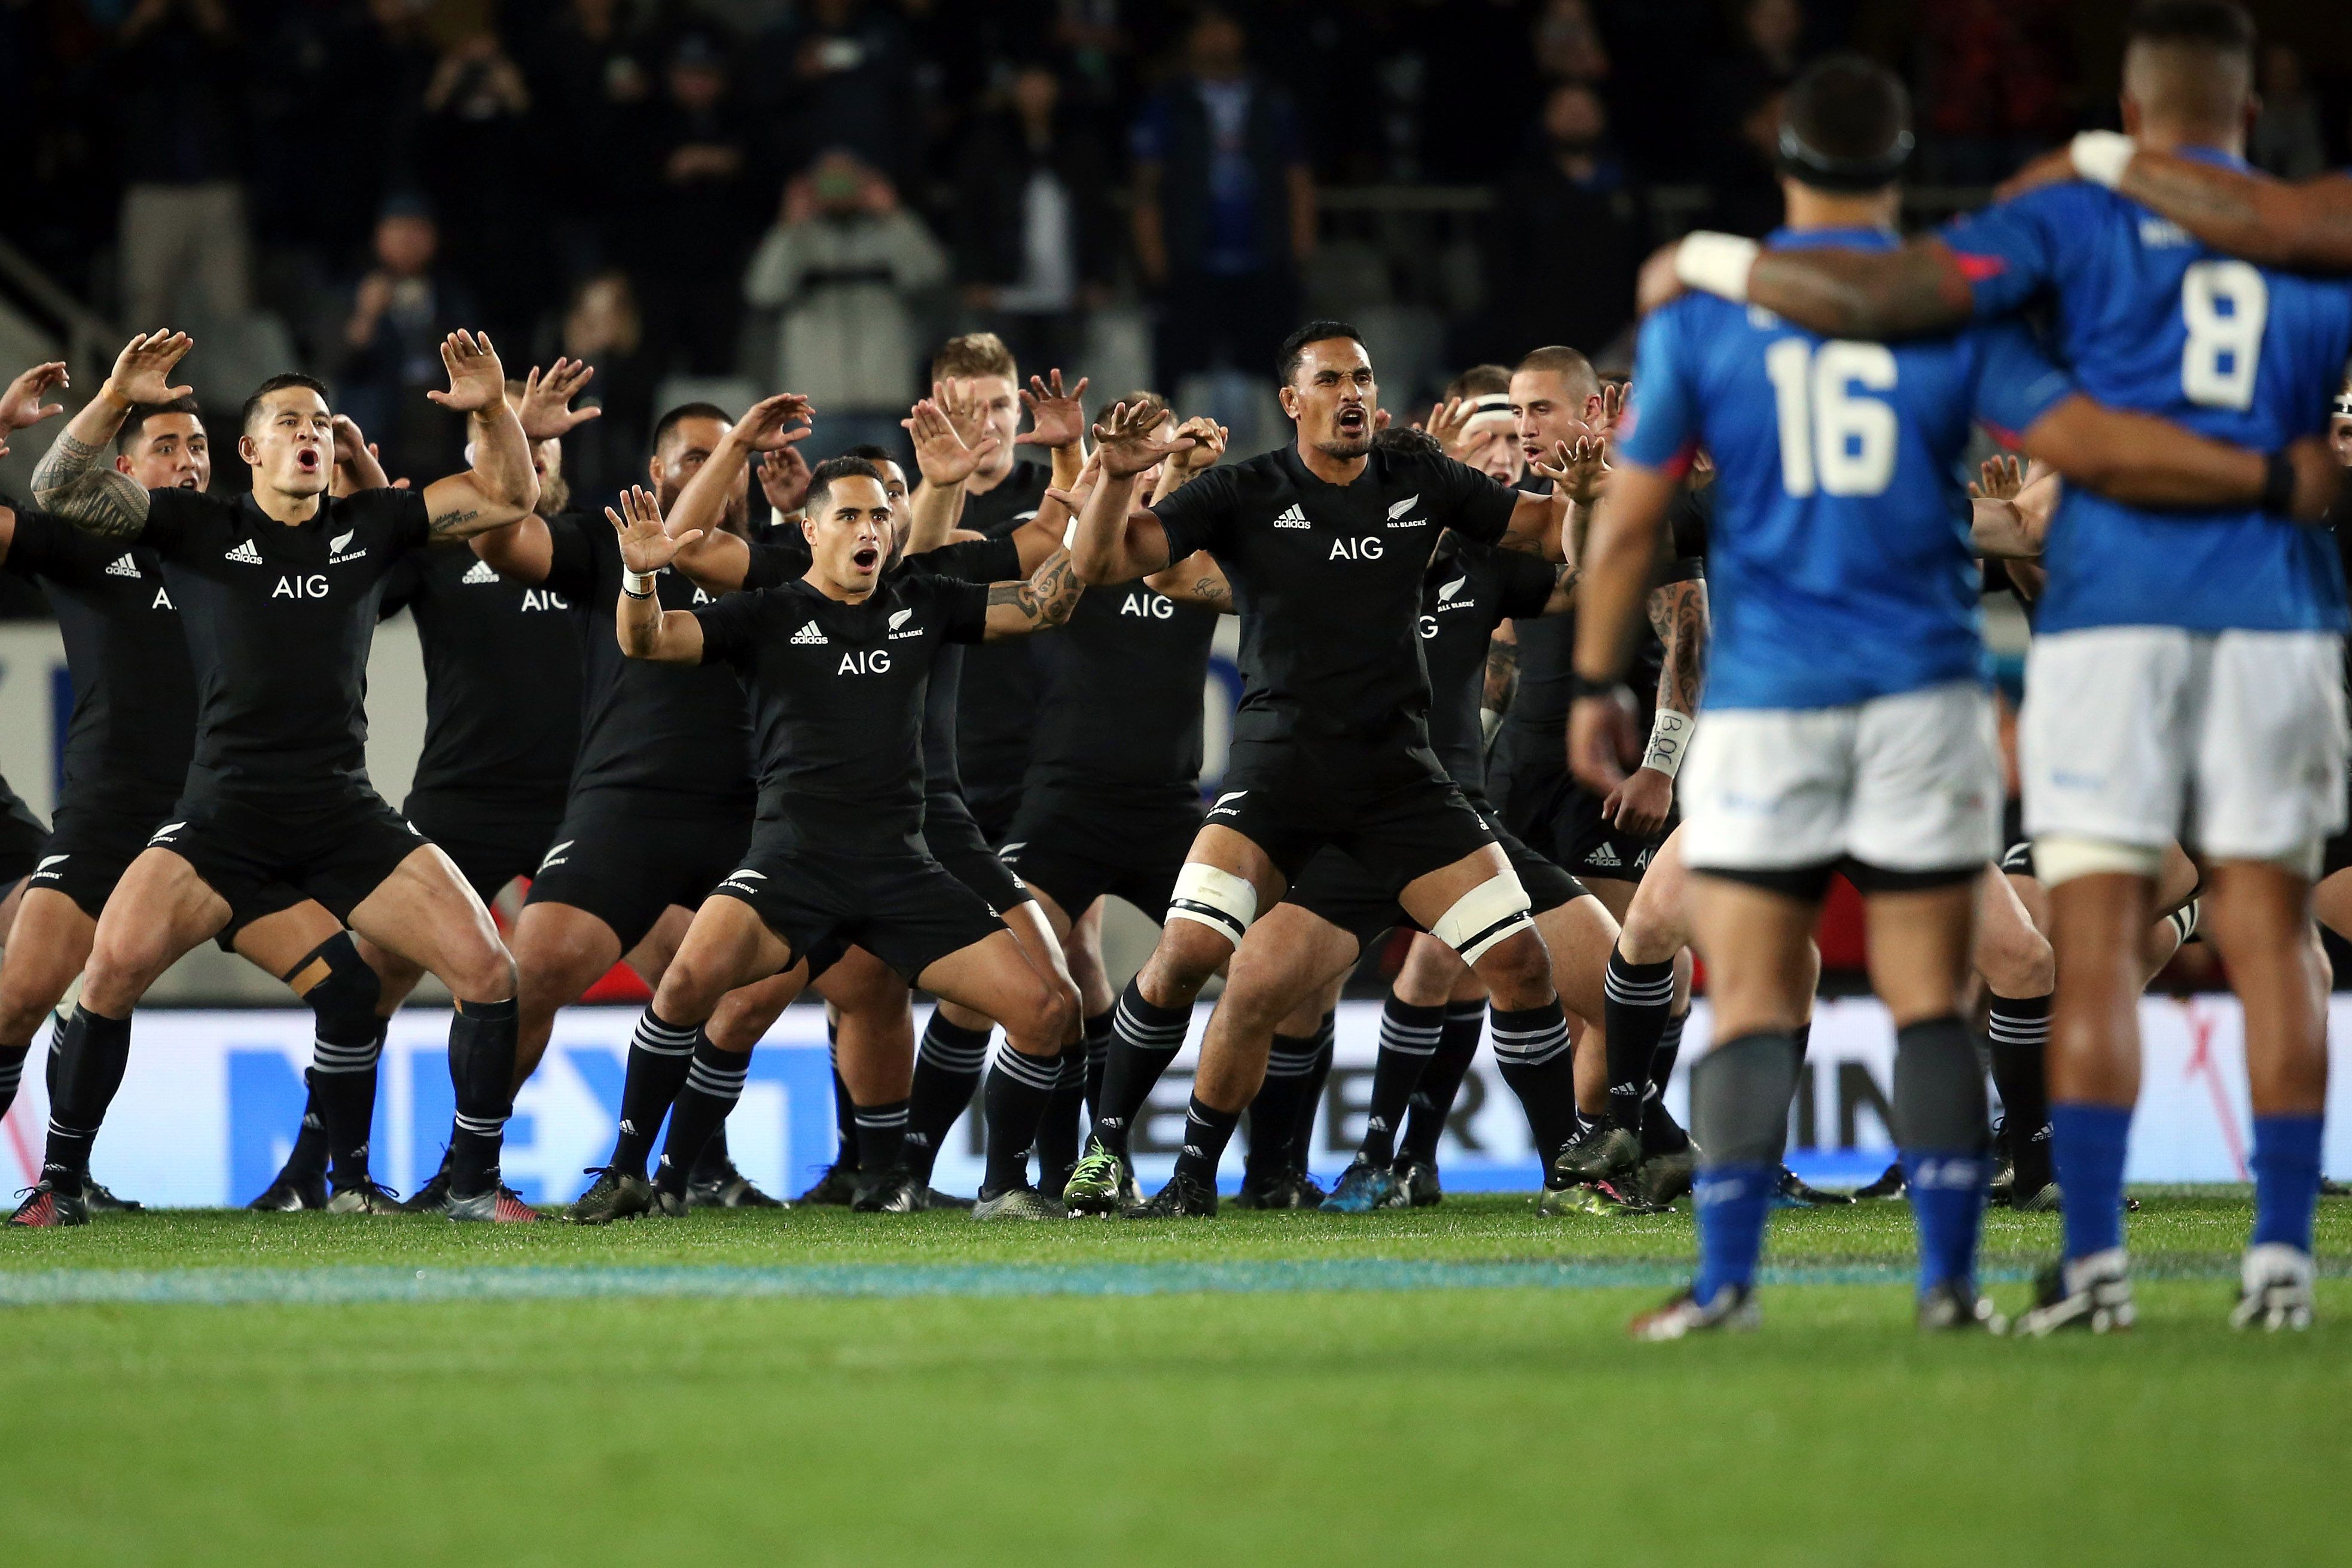 New Zealand's players perform the haka before the match against Samoa at Eden Park in Auckland. Photo: AFP